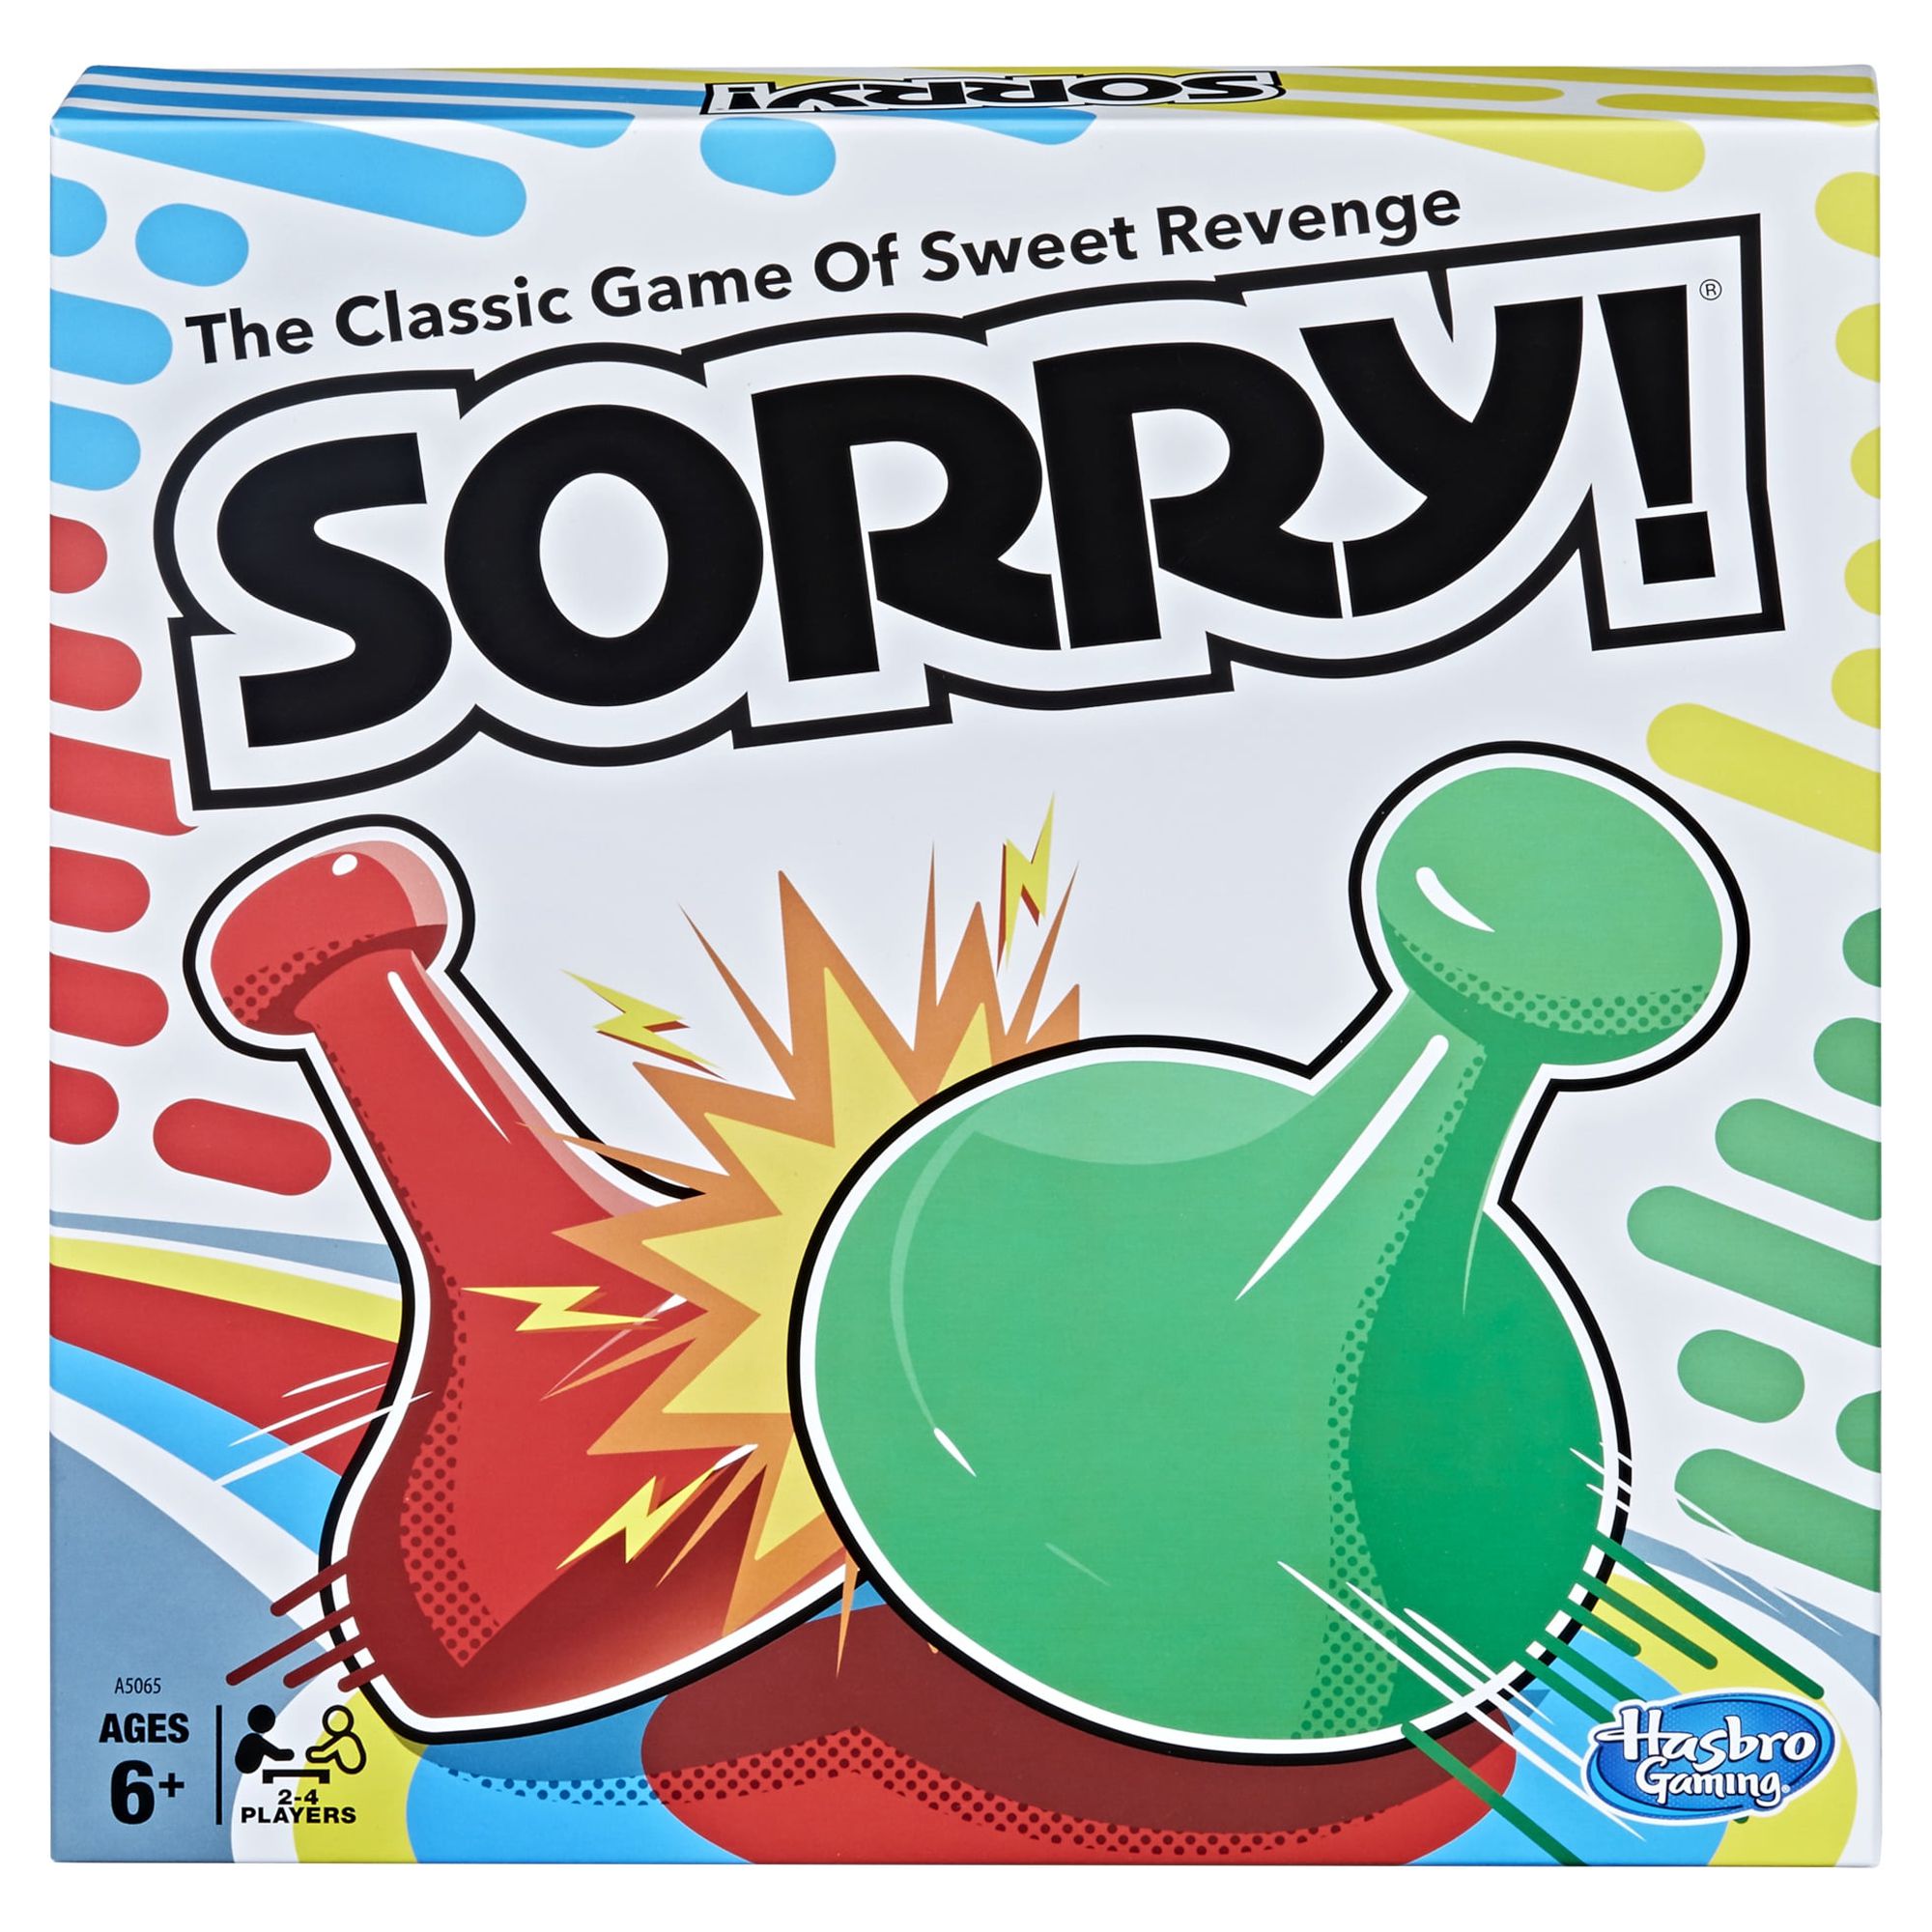 Sorry! The Classic Game Of Sweet Revenge Board Game for Kids and Family Ages 6 and Up, 2-4 Players - image 1 of 10